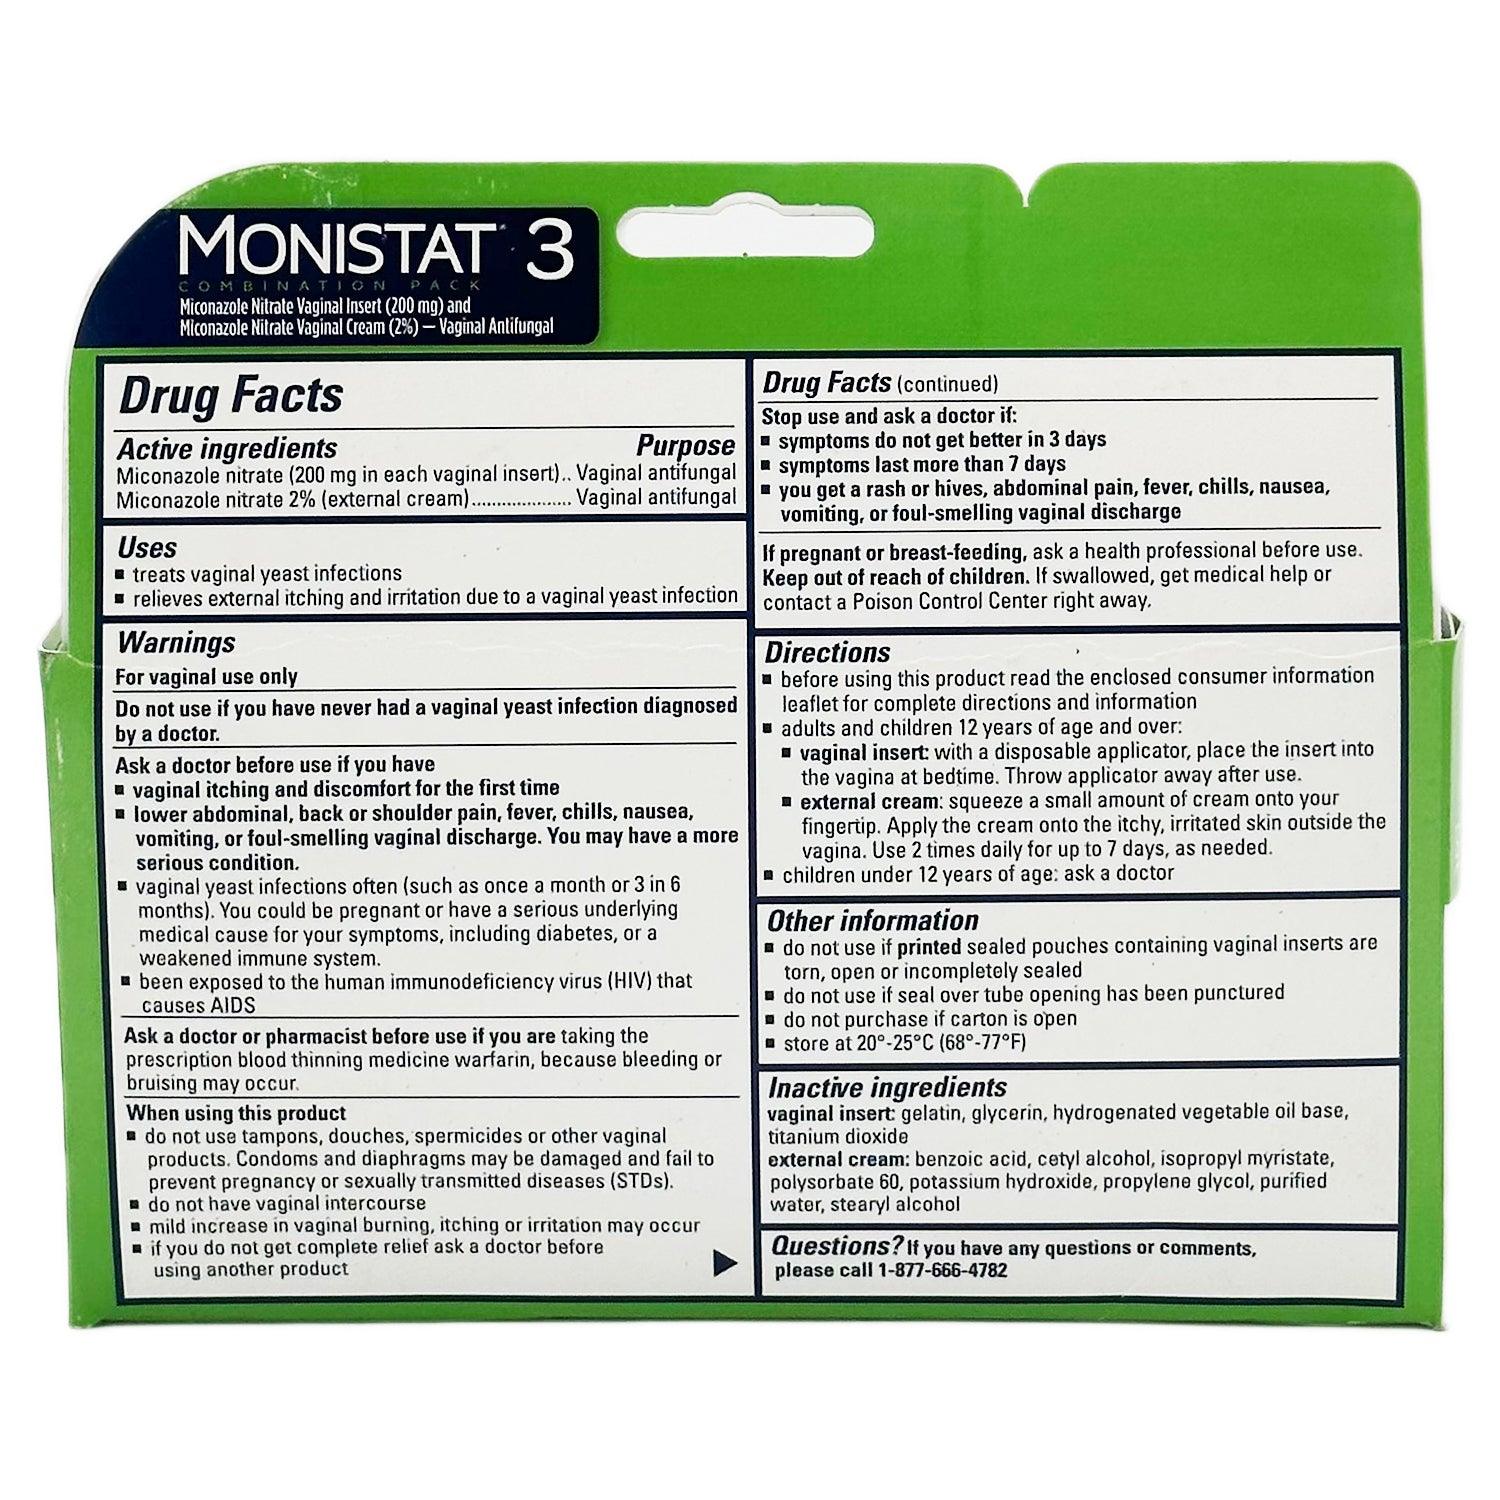 Monistat 3-Dose Yeast Infection Treatment, 3 Ovule Inserts | BEST BY 03/24 - Home Revival Shop